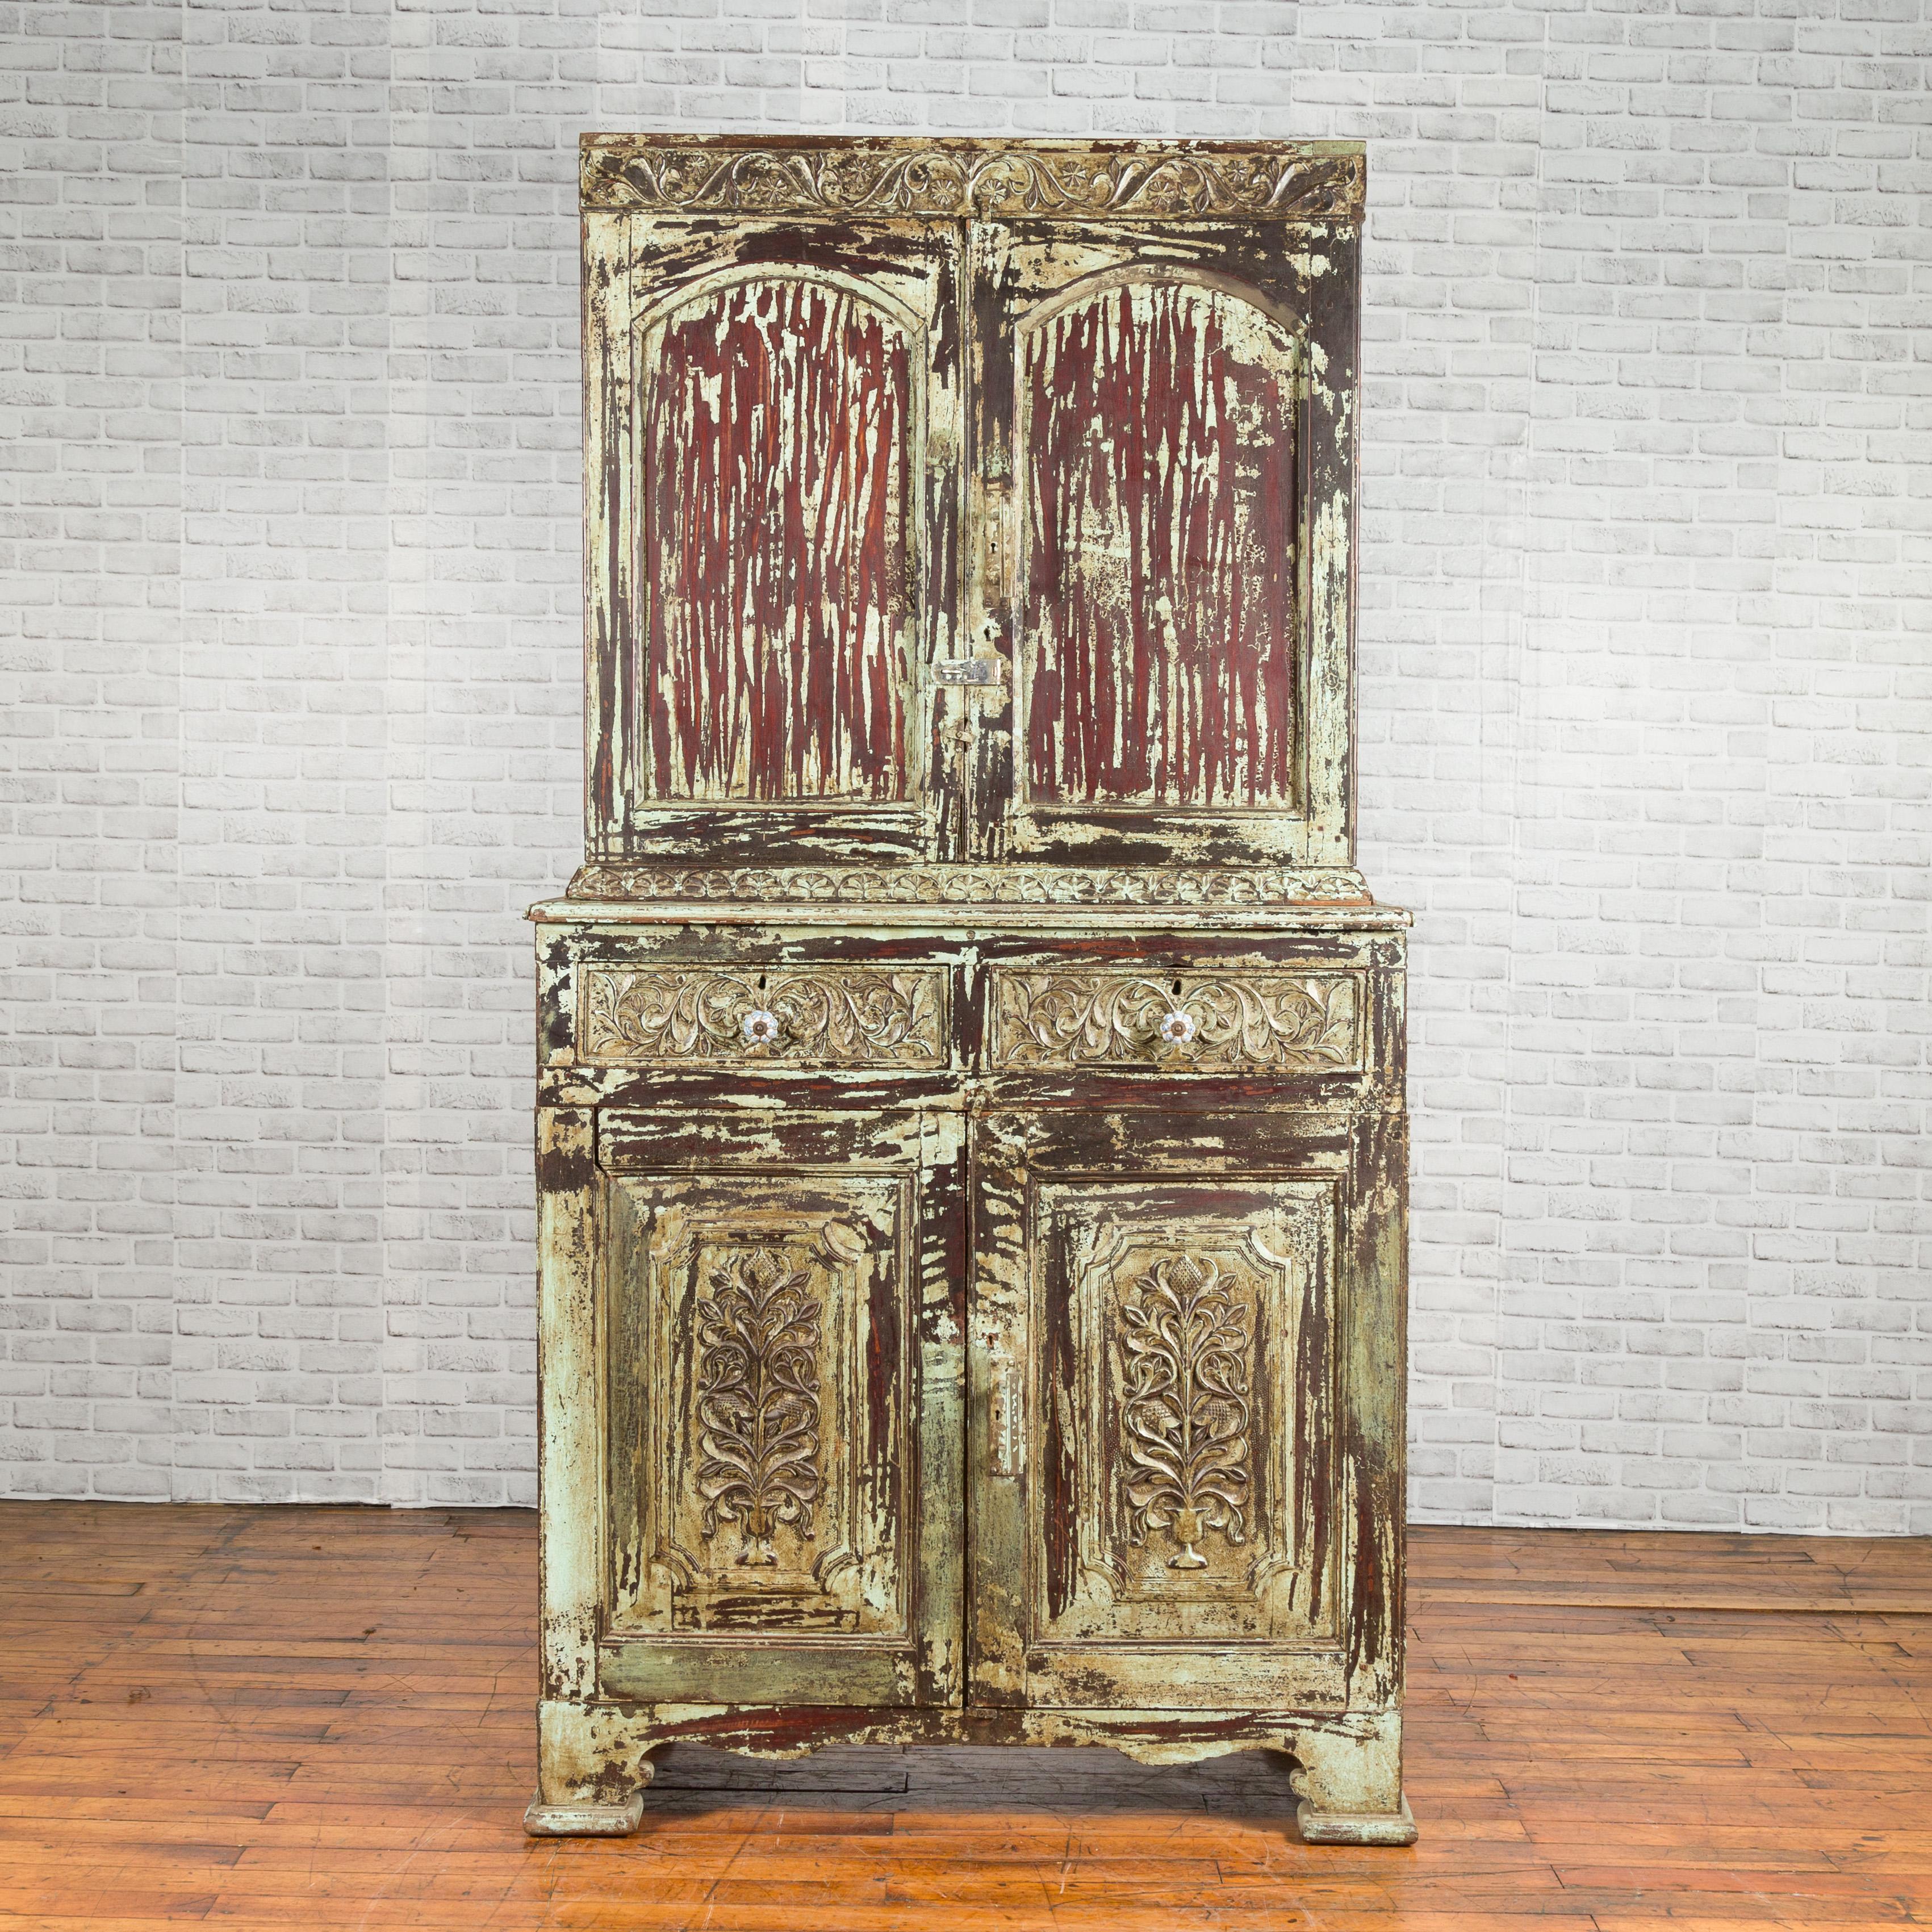 An Indian rustic painted wood cabinet from the early 21st century with carved scrolling foliage and distressed patina. Created in India during the early years of the 21st century, this tall buffet à deux-corps captures our attention with its carved